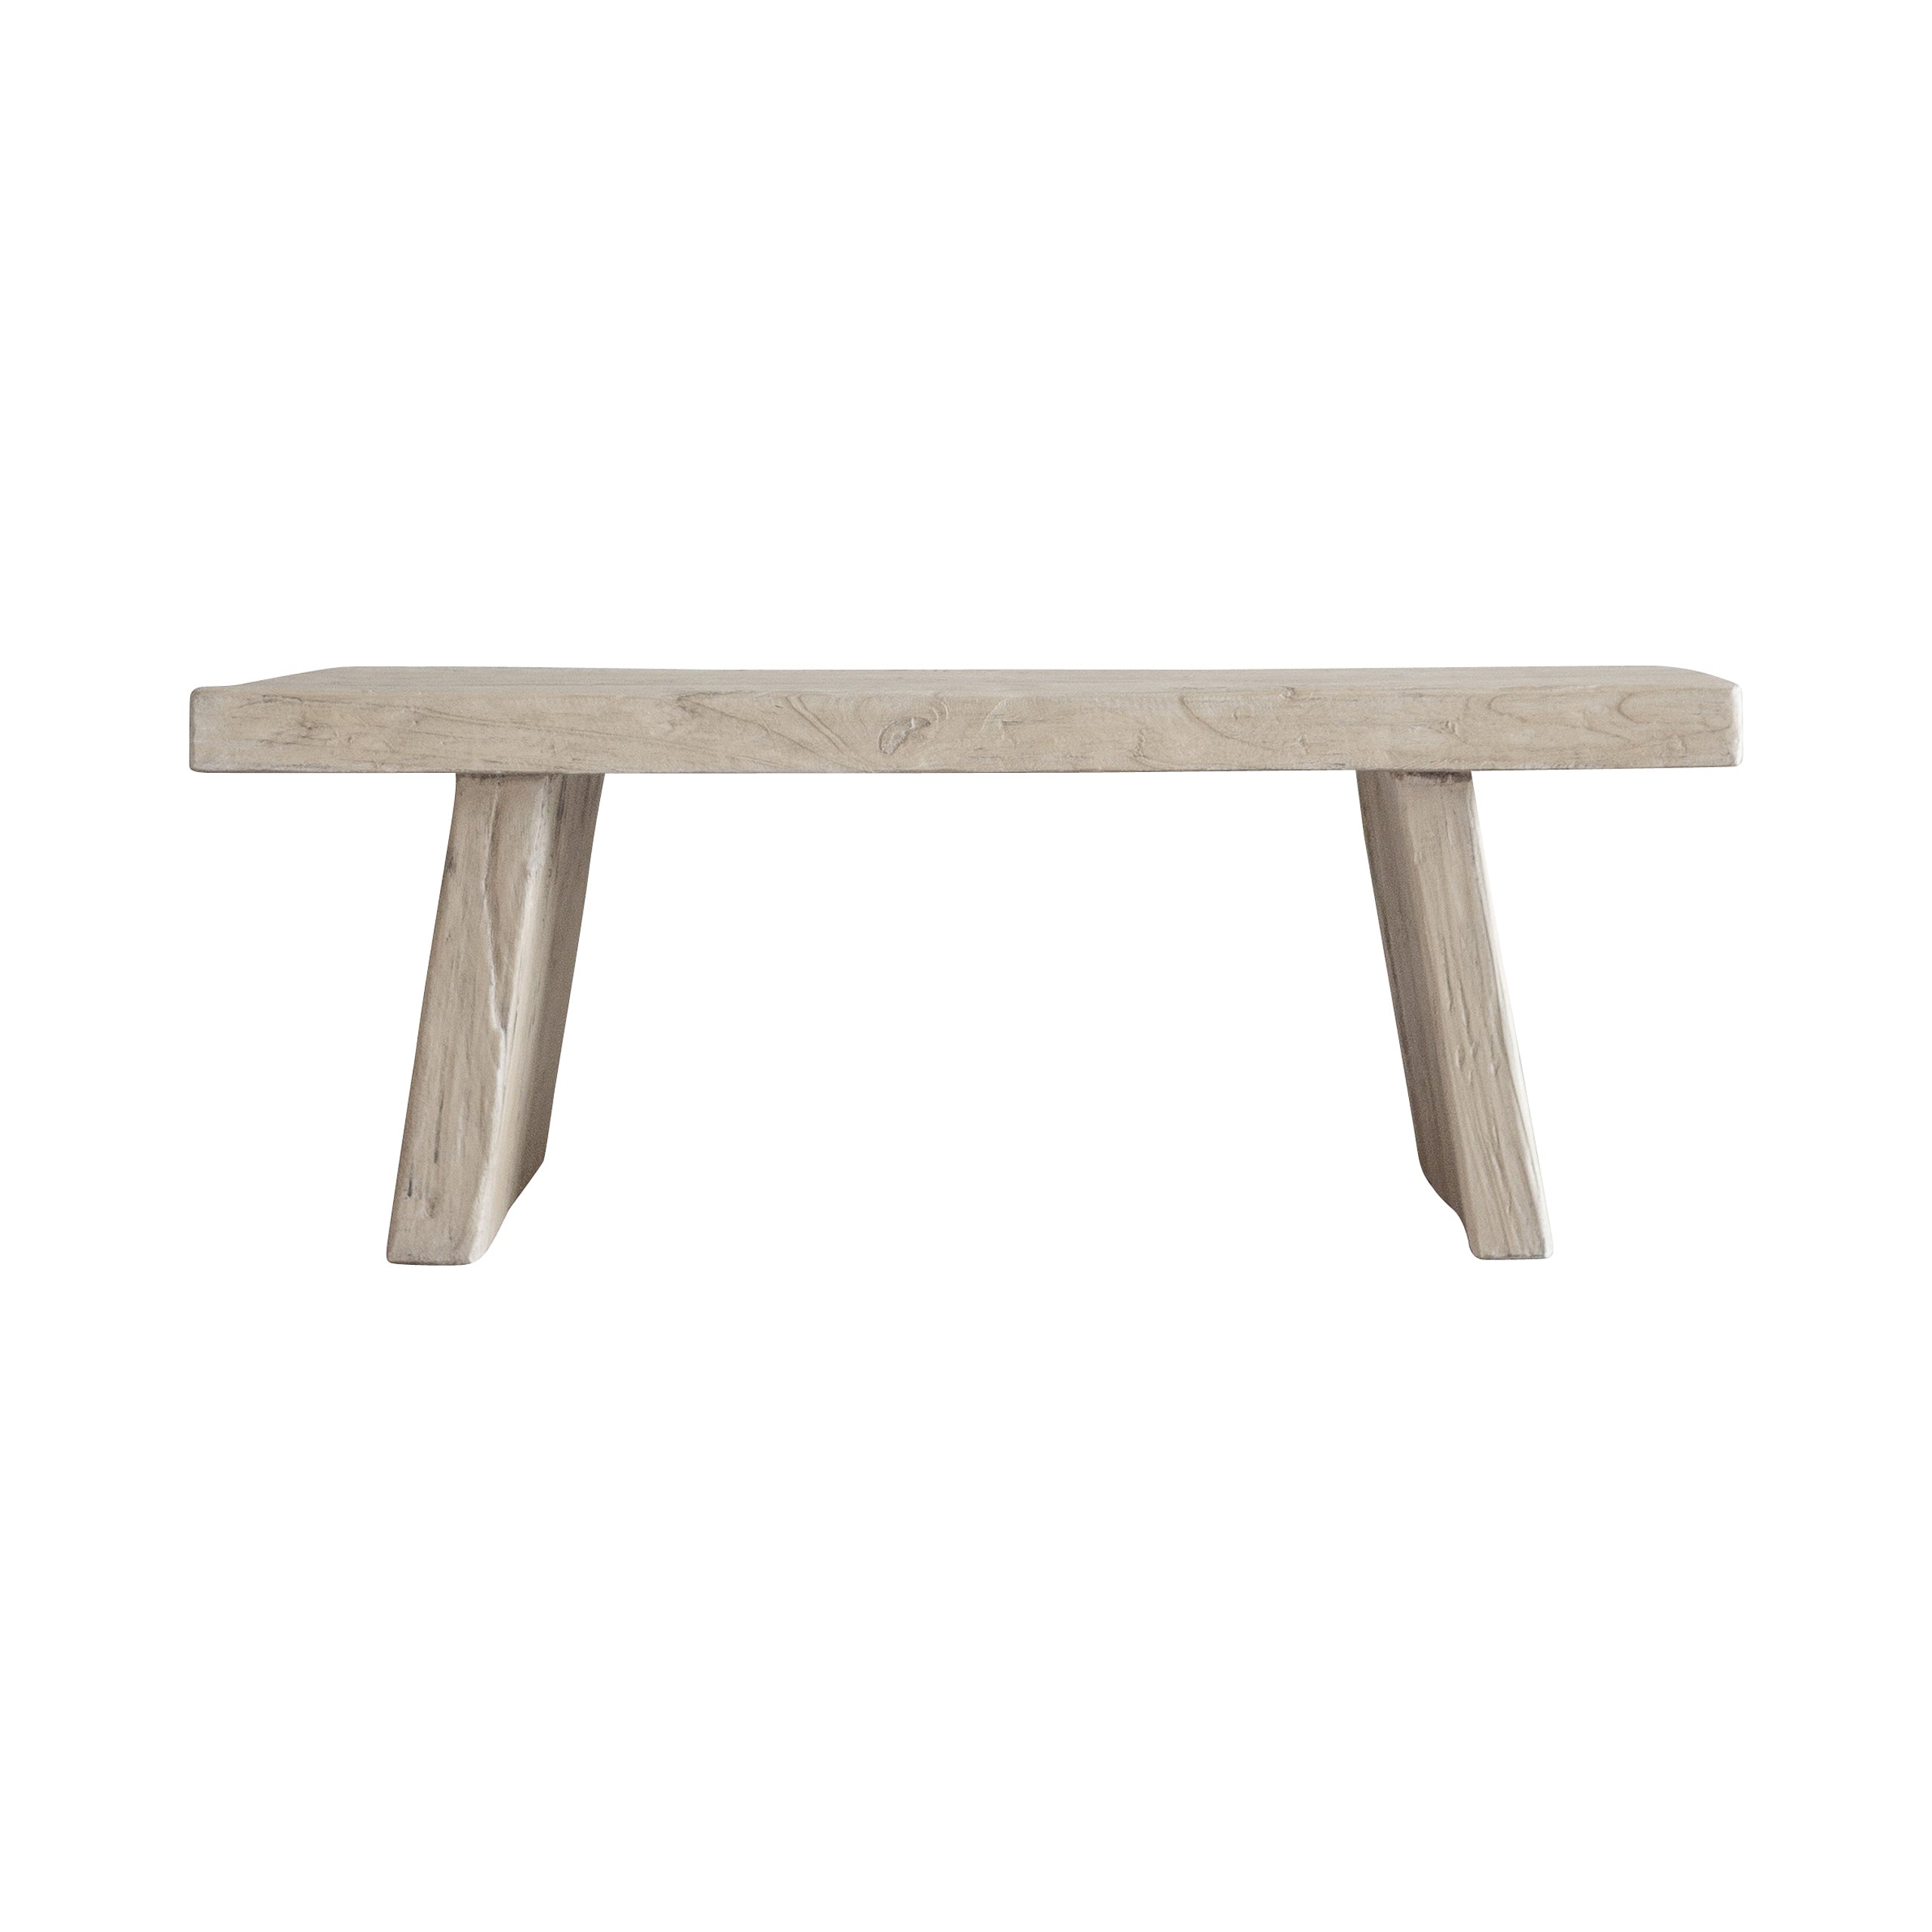 Elm Coffee Table with Angled Legs